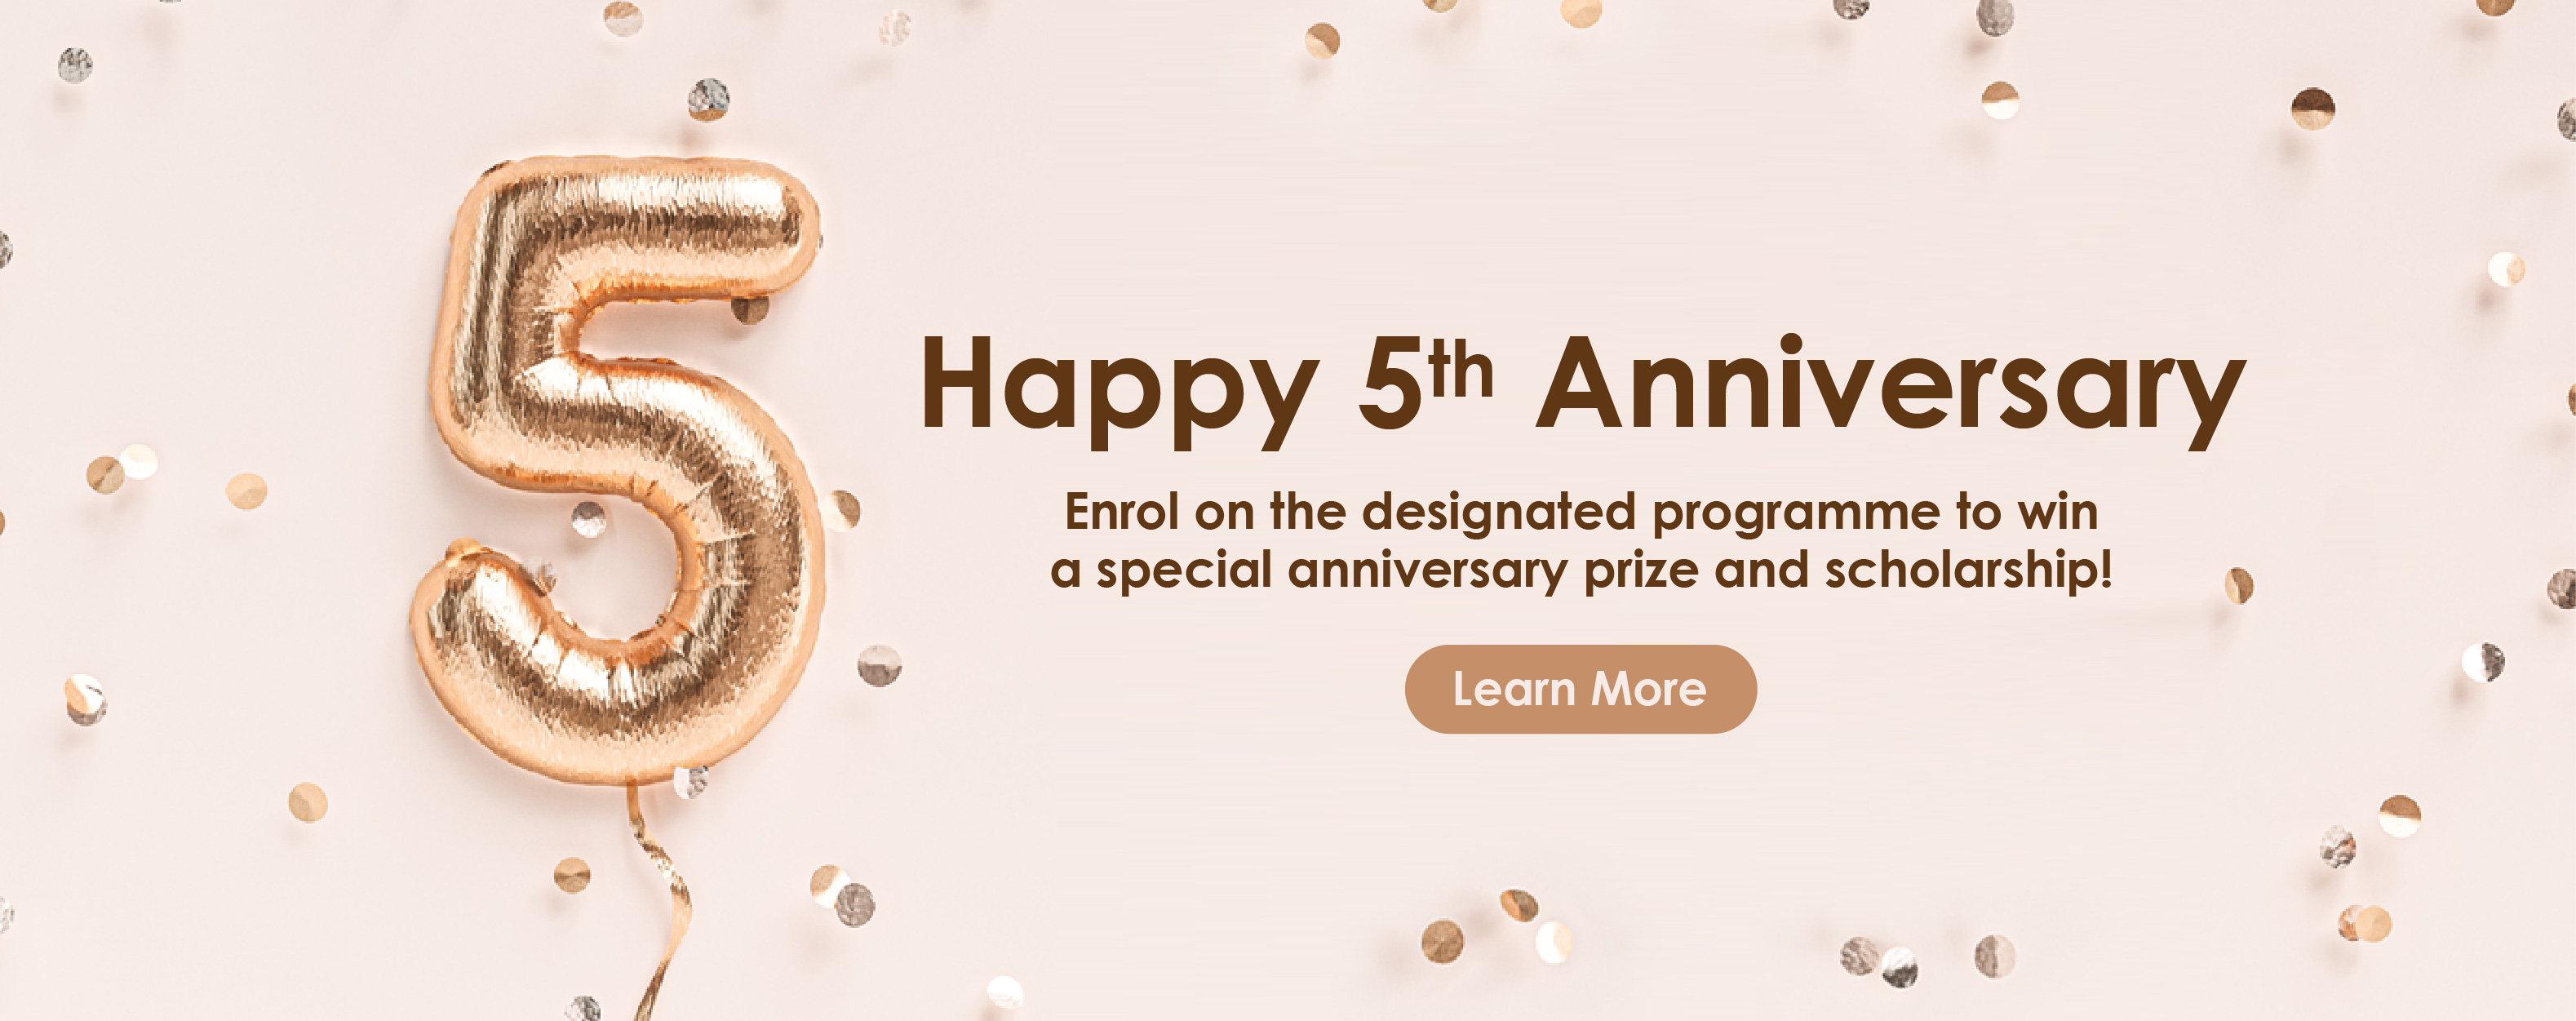 5th anniversary Promotion